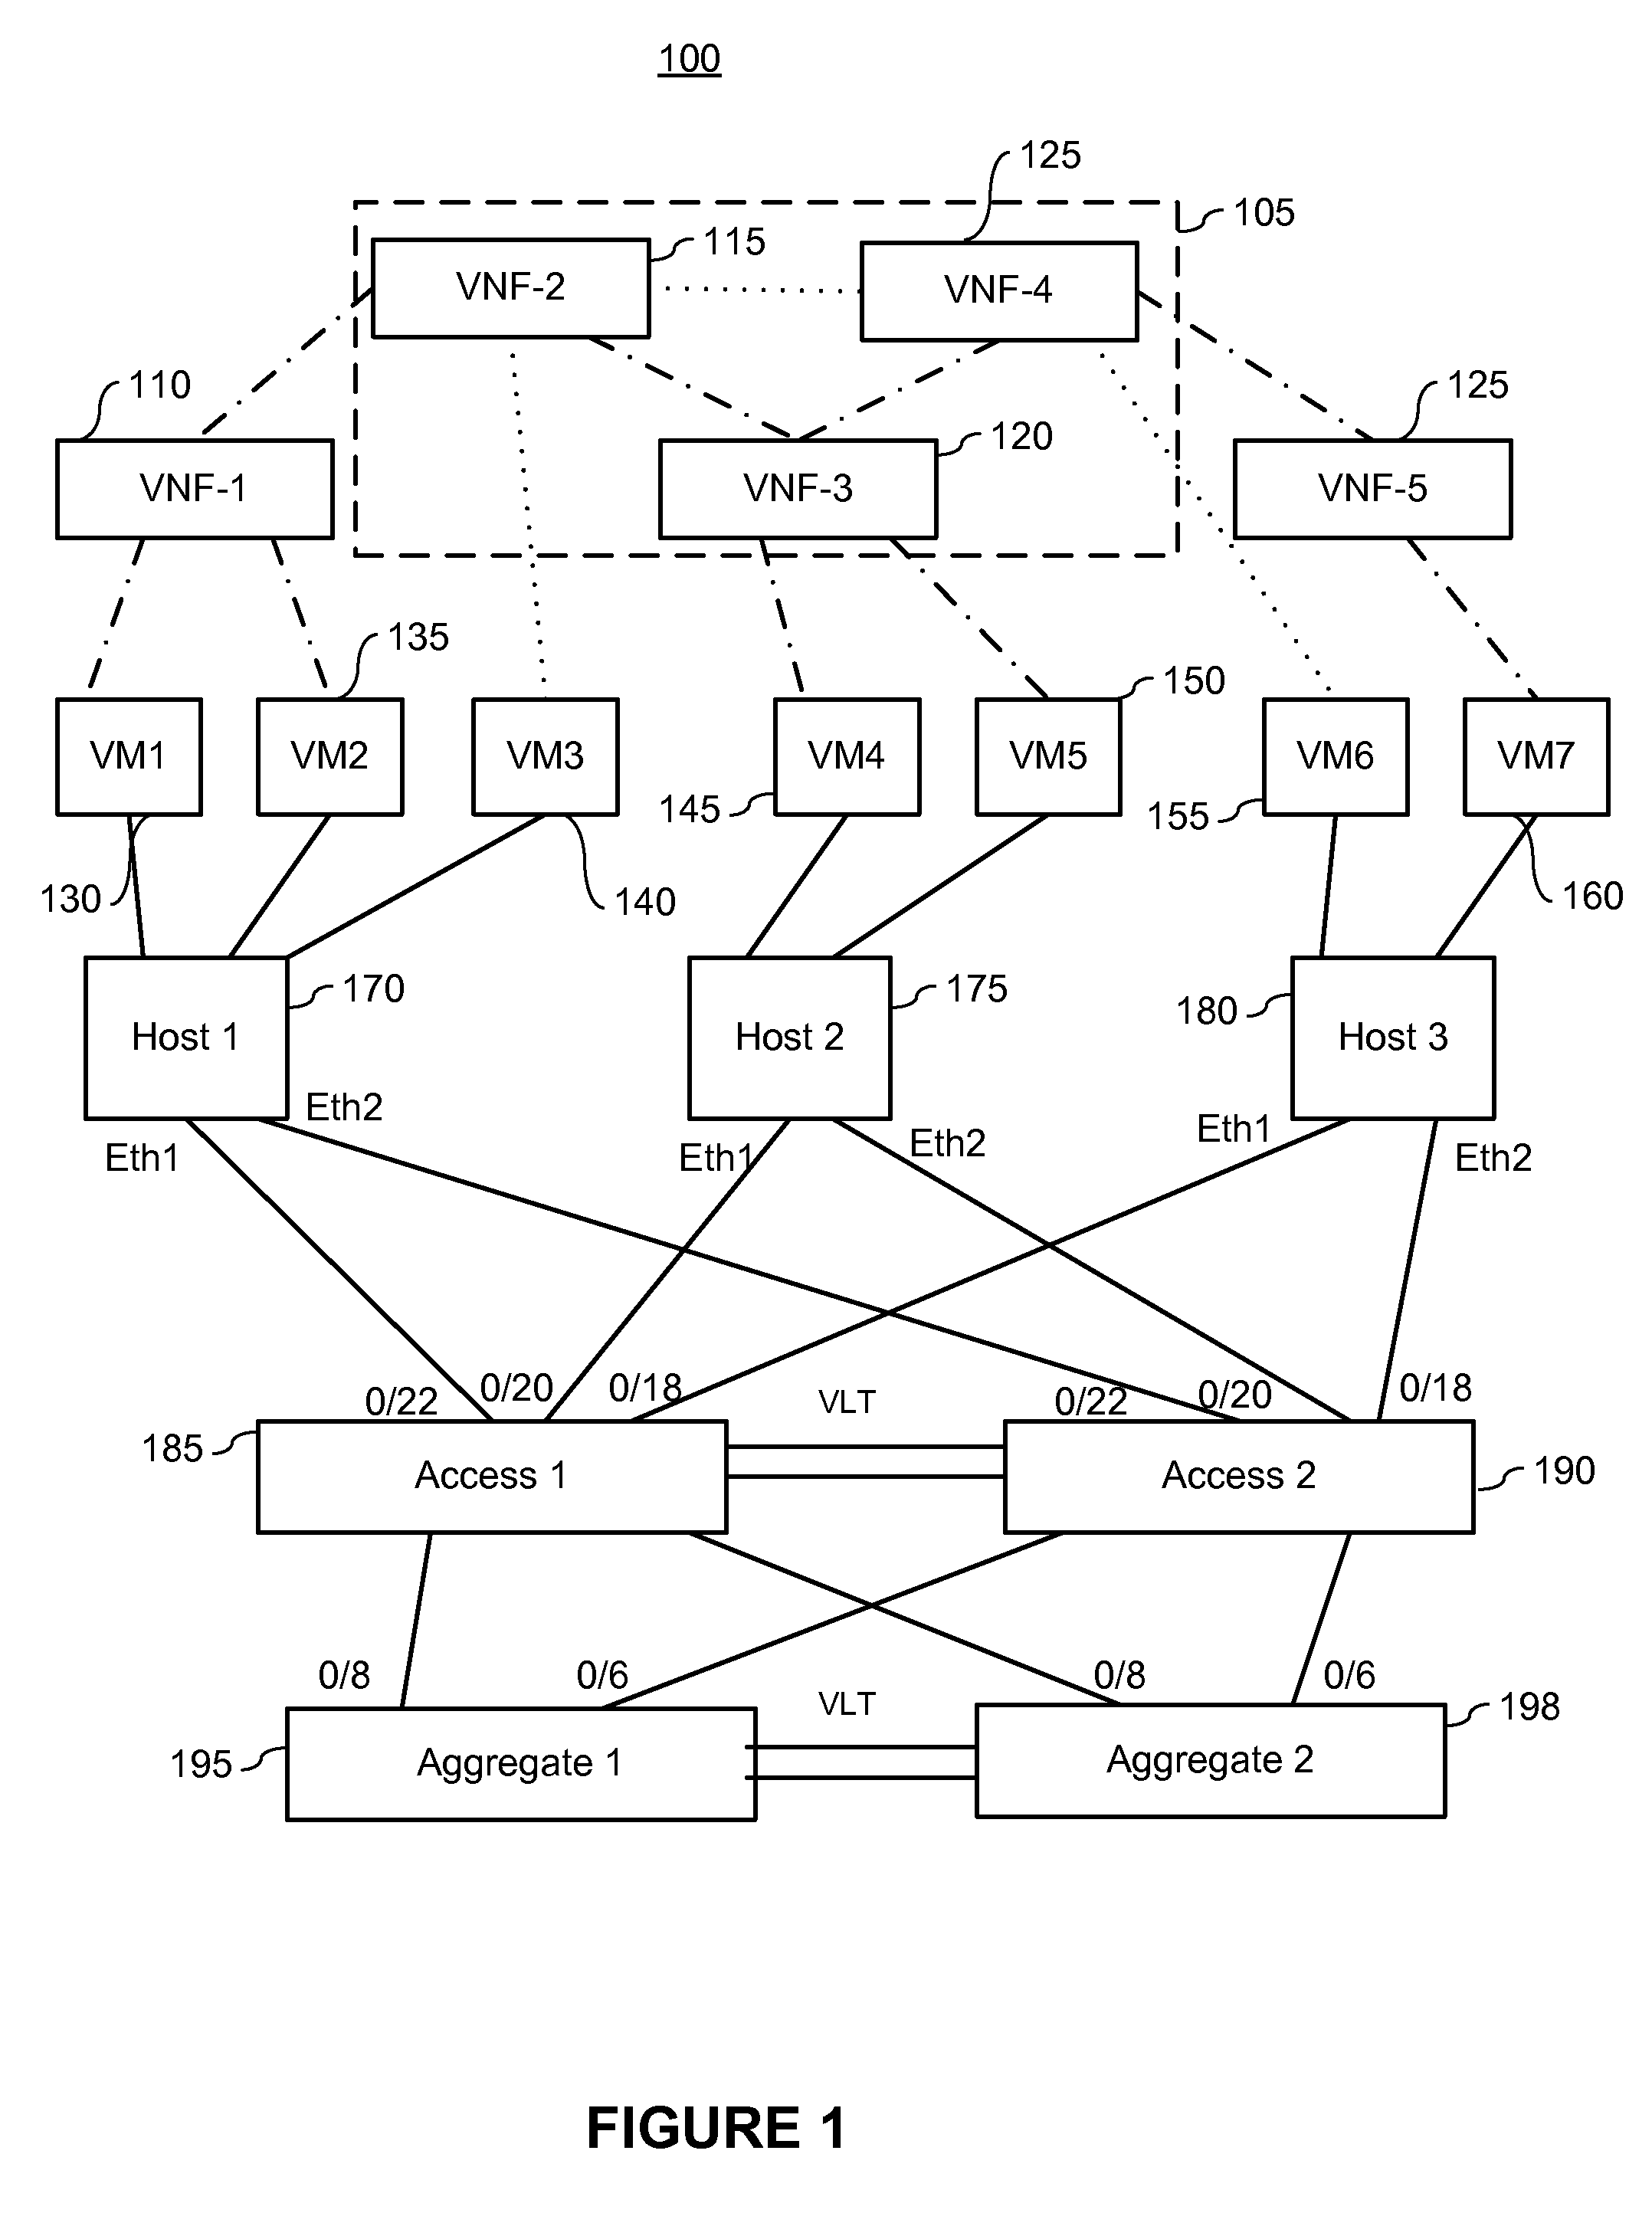 System and method for adaptive paths locator for virtual network function links